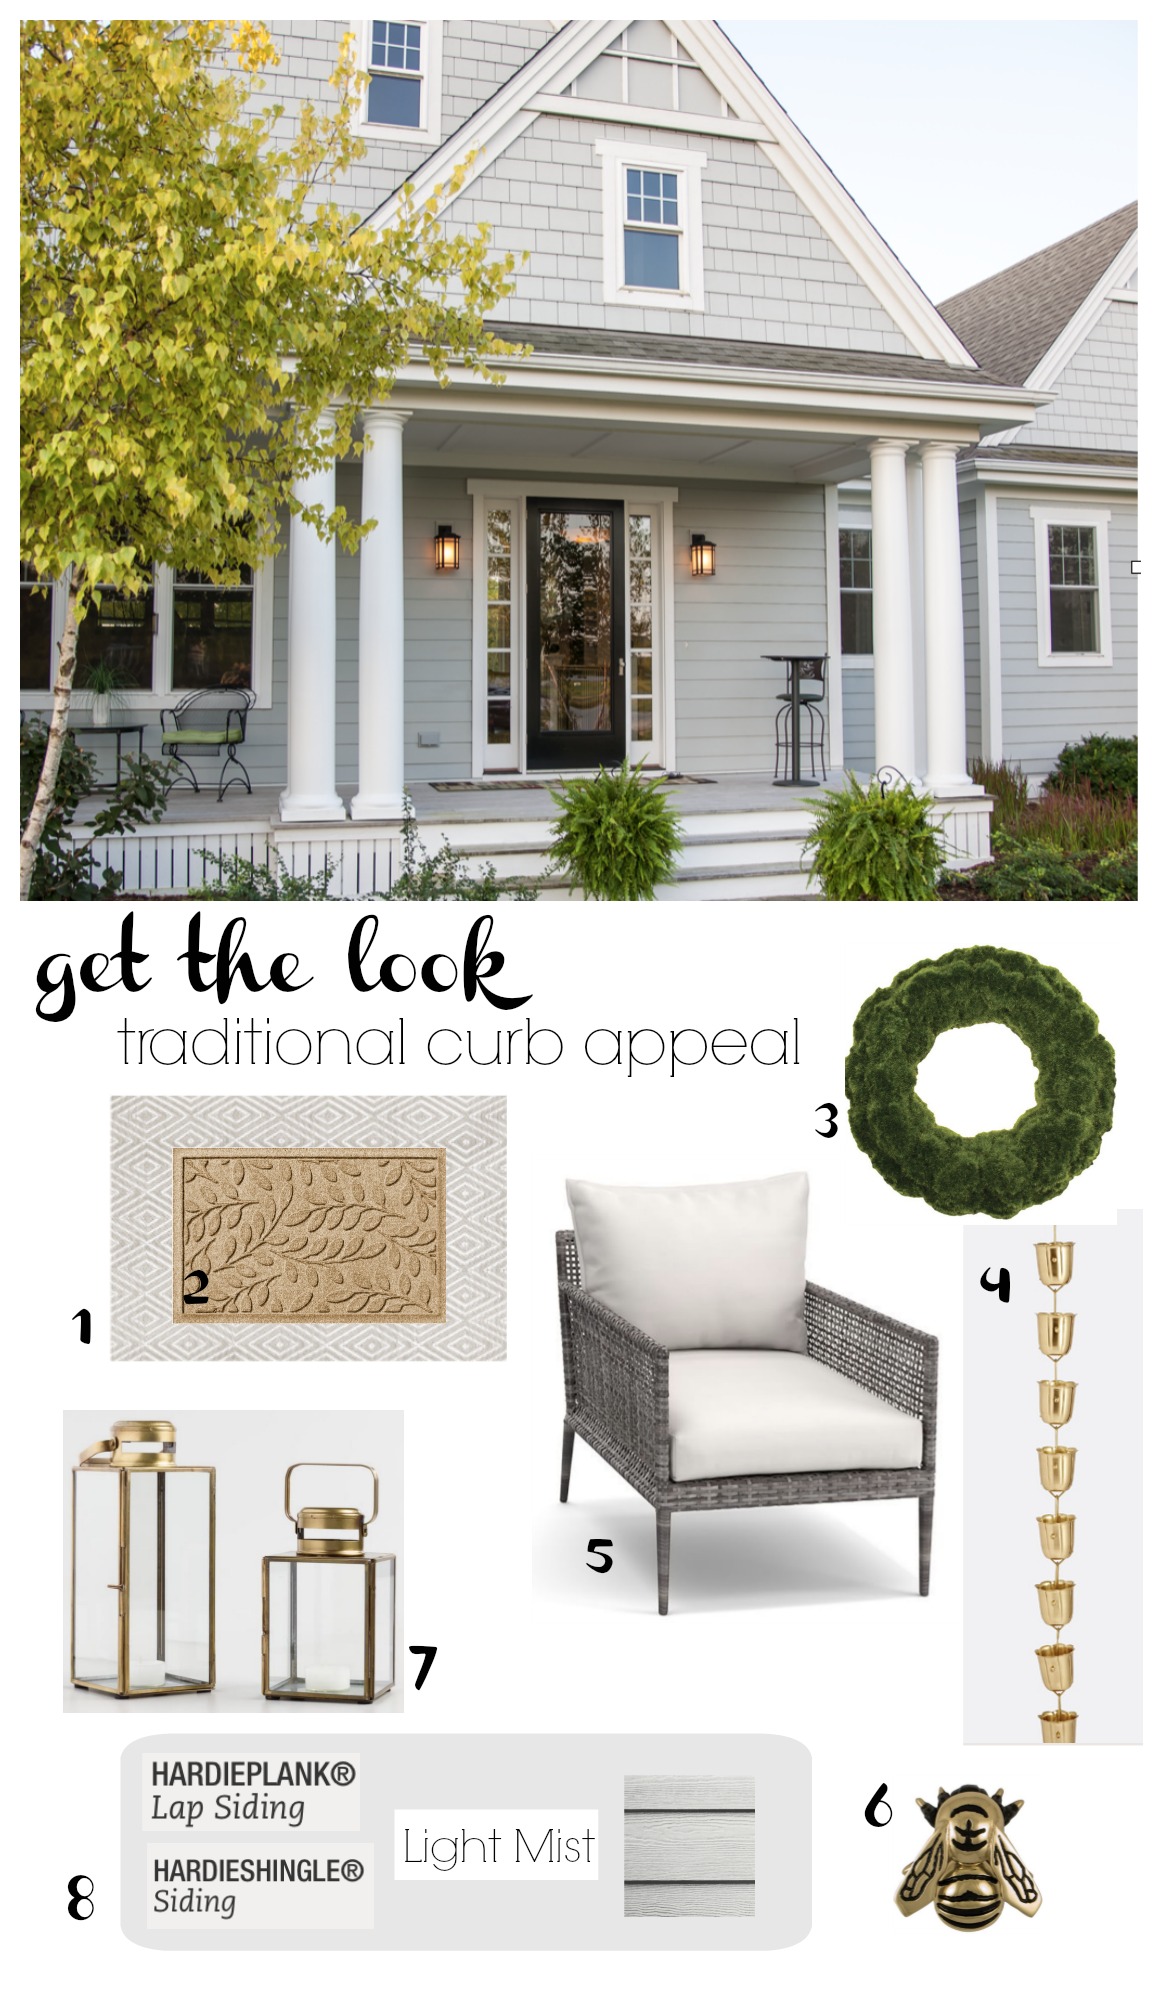 Get the Look- Traditional Curb Appeal- Arctic White